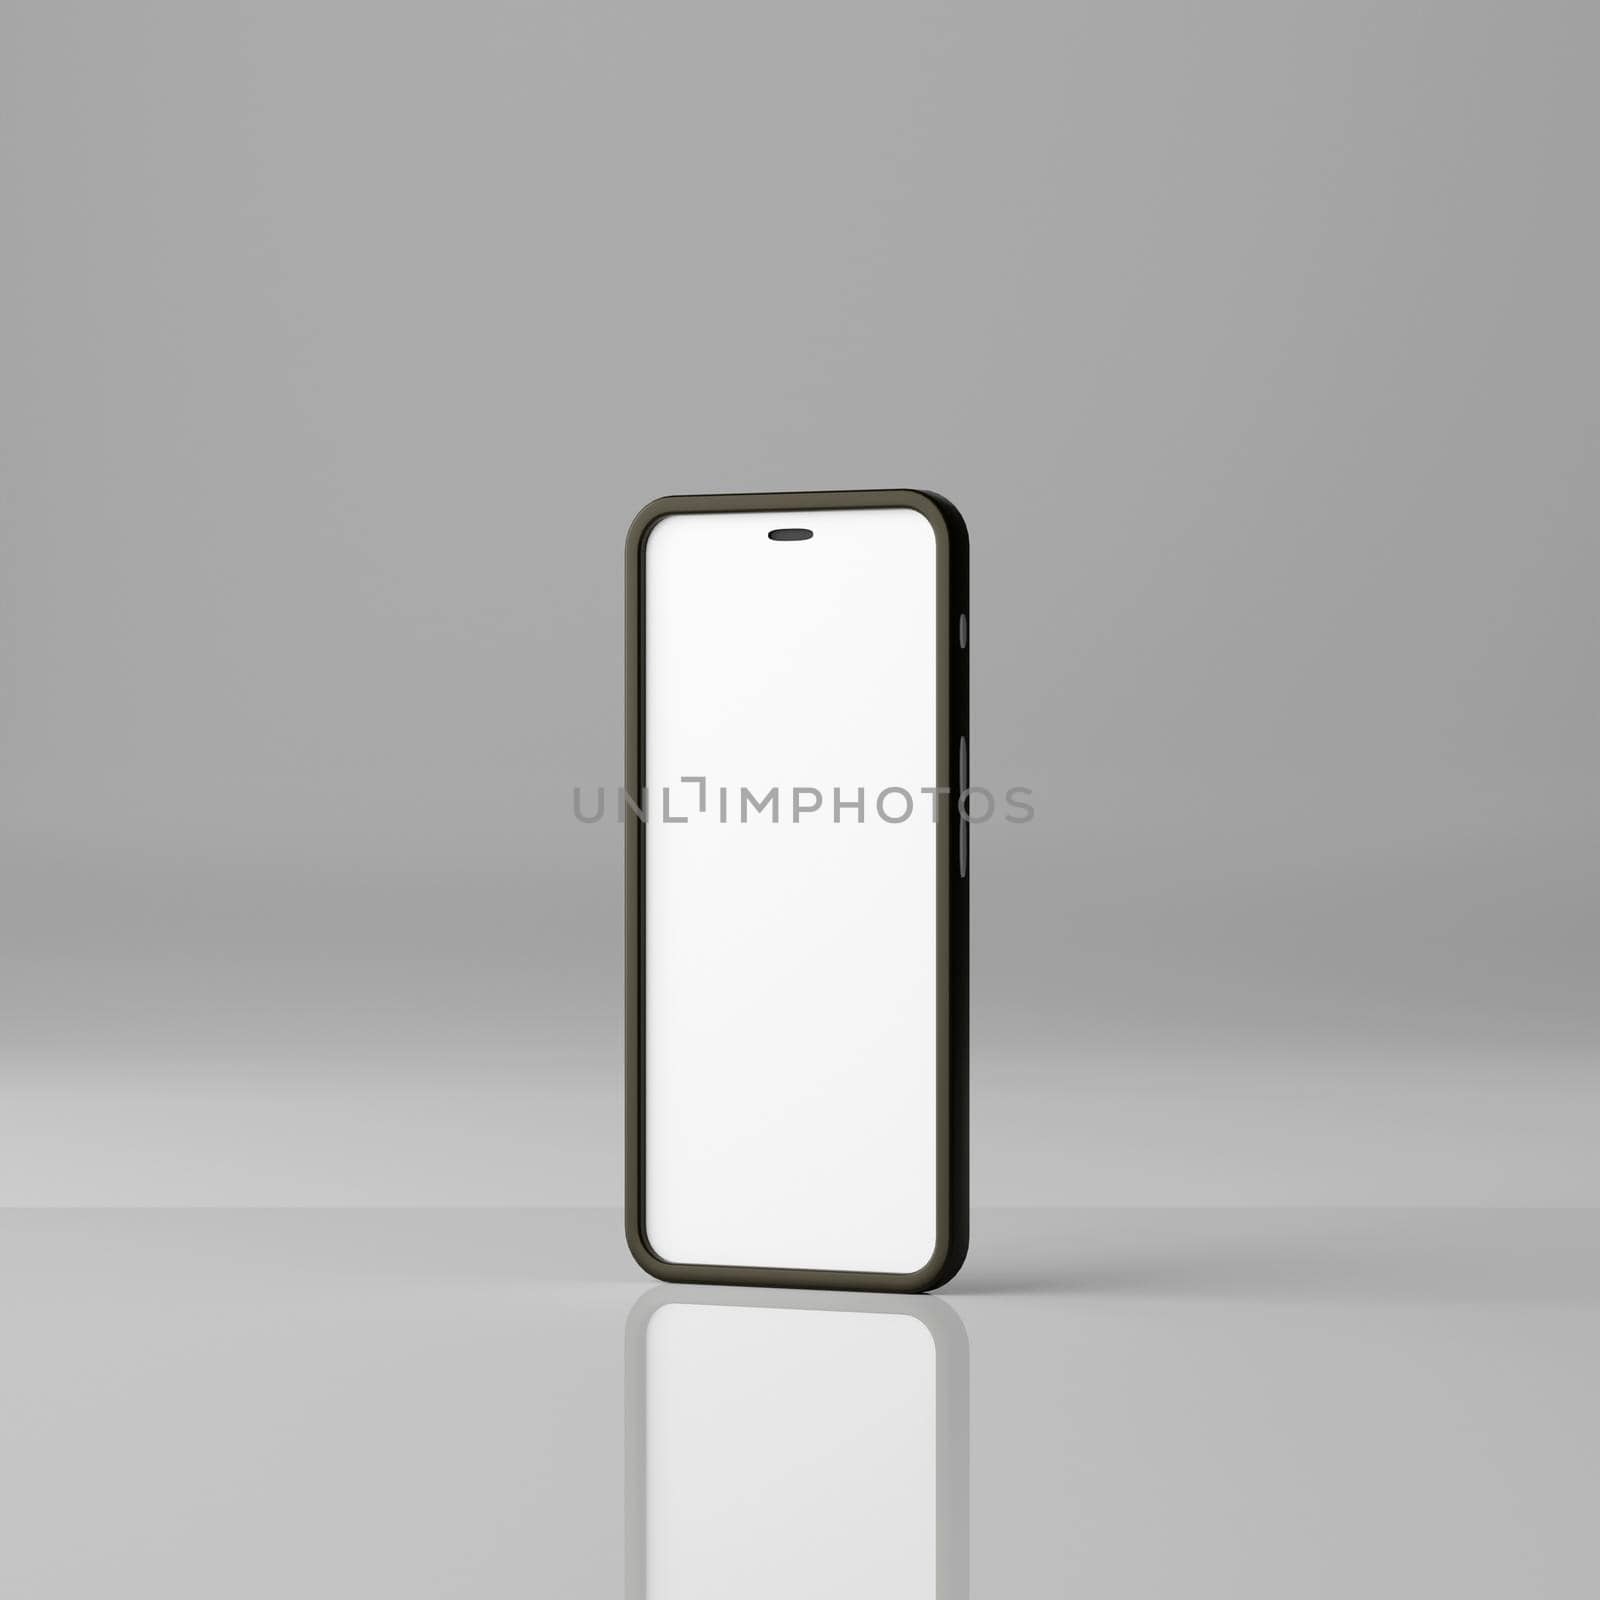 Smartphone mockup with blank white screen on a grey background. 3D Render